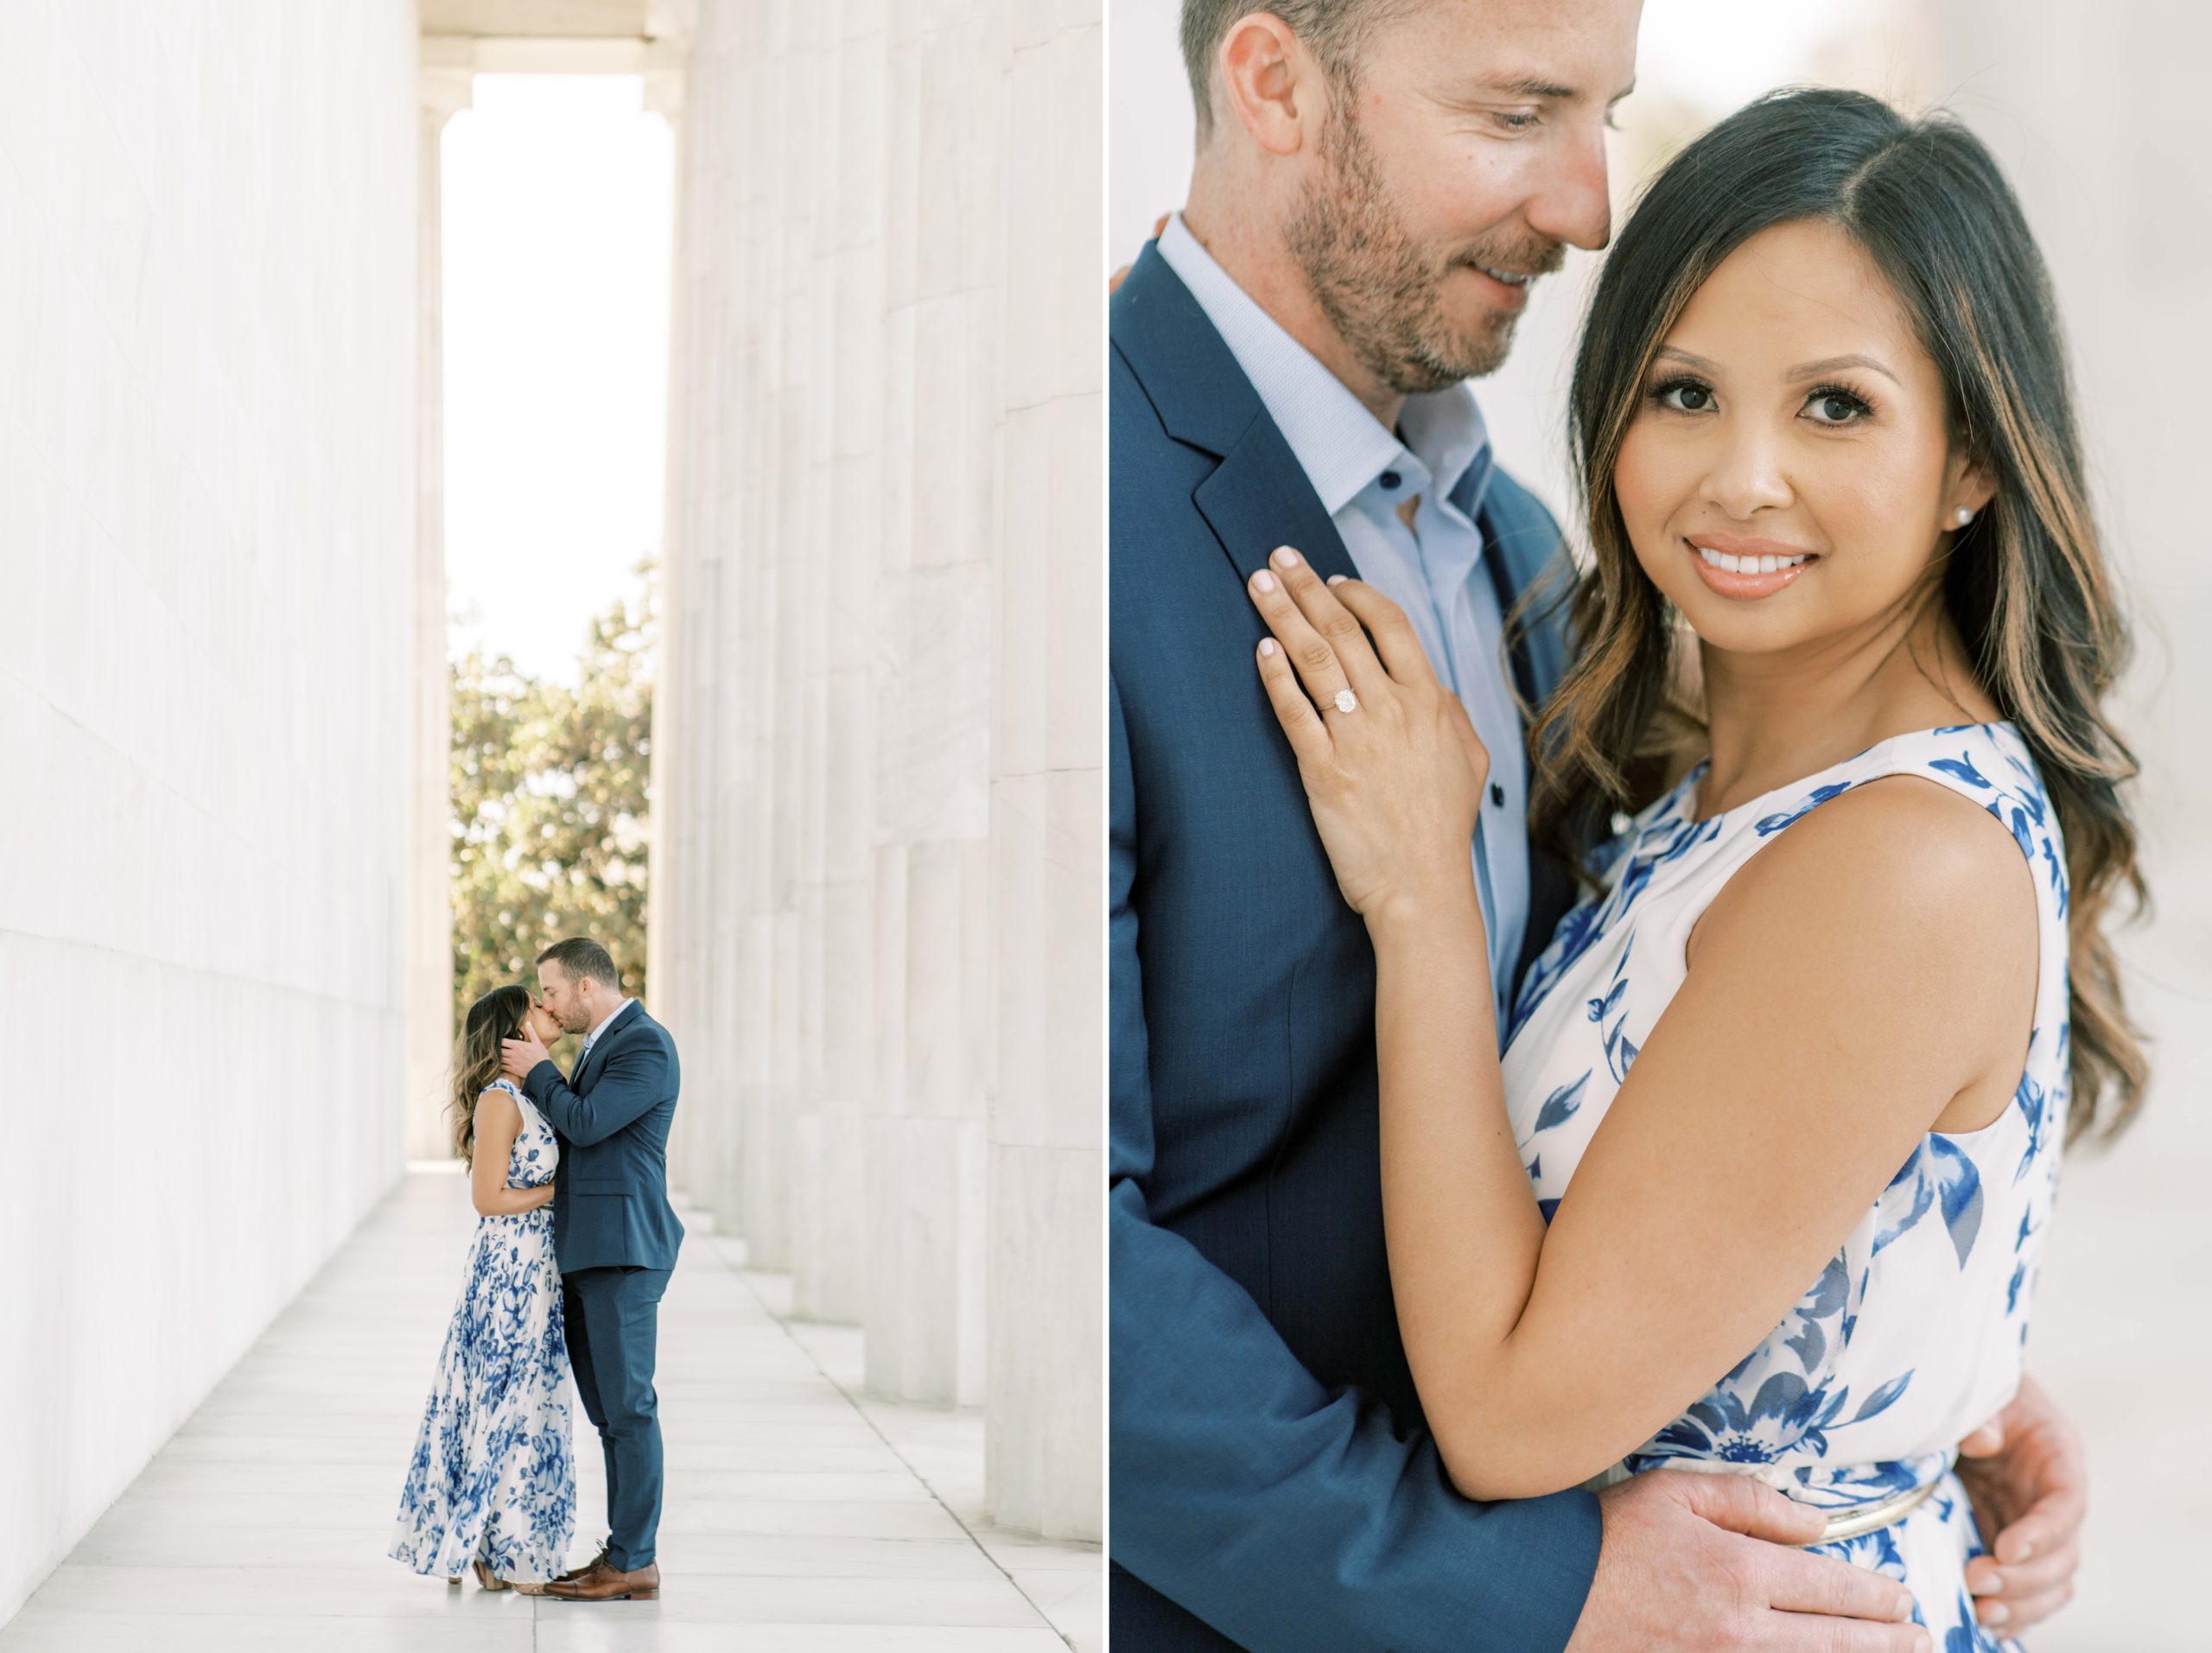 Engagement photos captured at the iconic monuments across Washington, DC by wedding photographer Alicia Lacey.